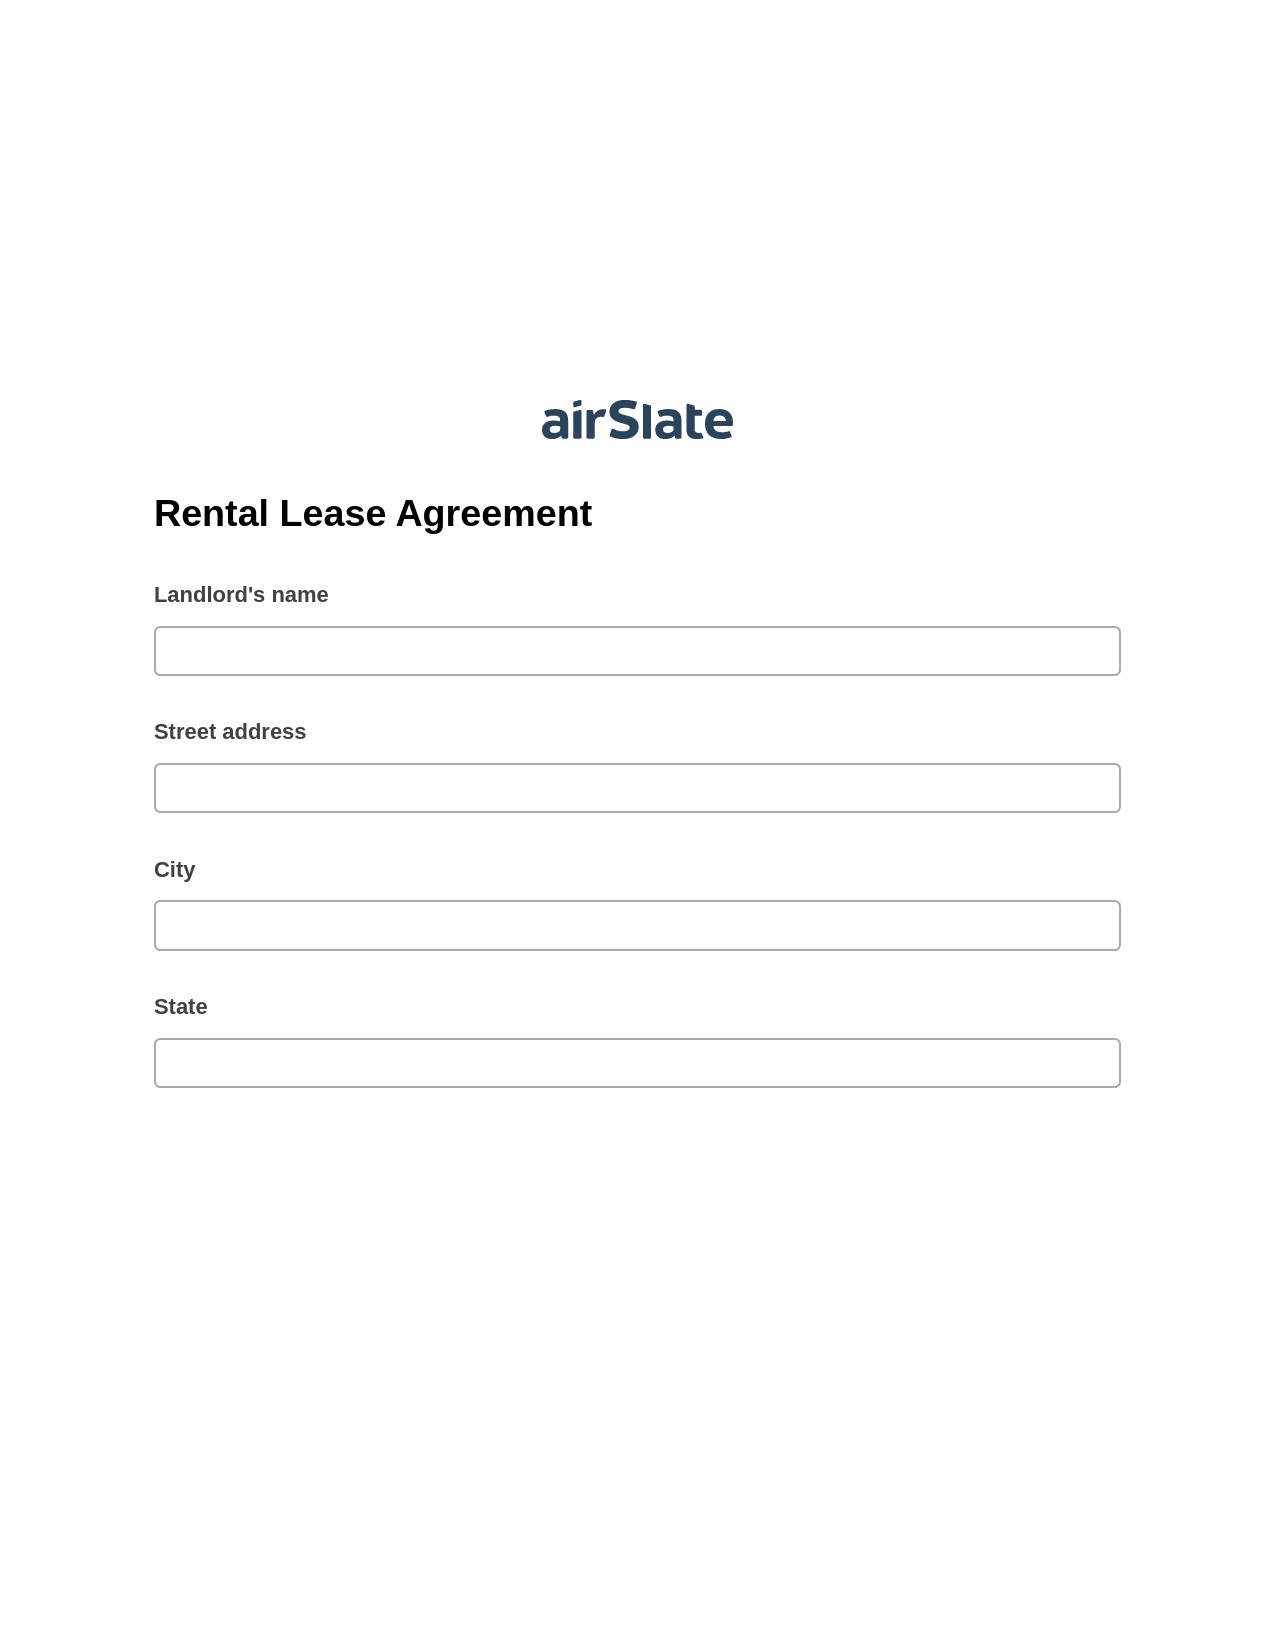 Rental Lease Agreement Pre-fill from Google Sheet Dropdown Options Bot, Update Salesforce Record Bot, Google Drive Bot